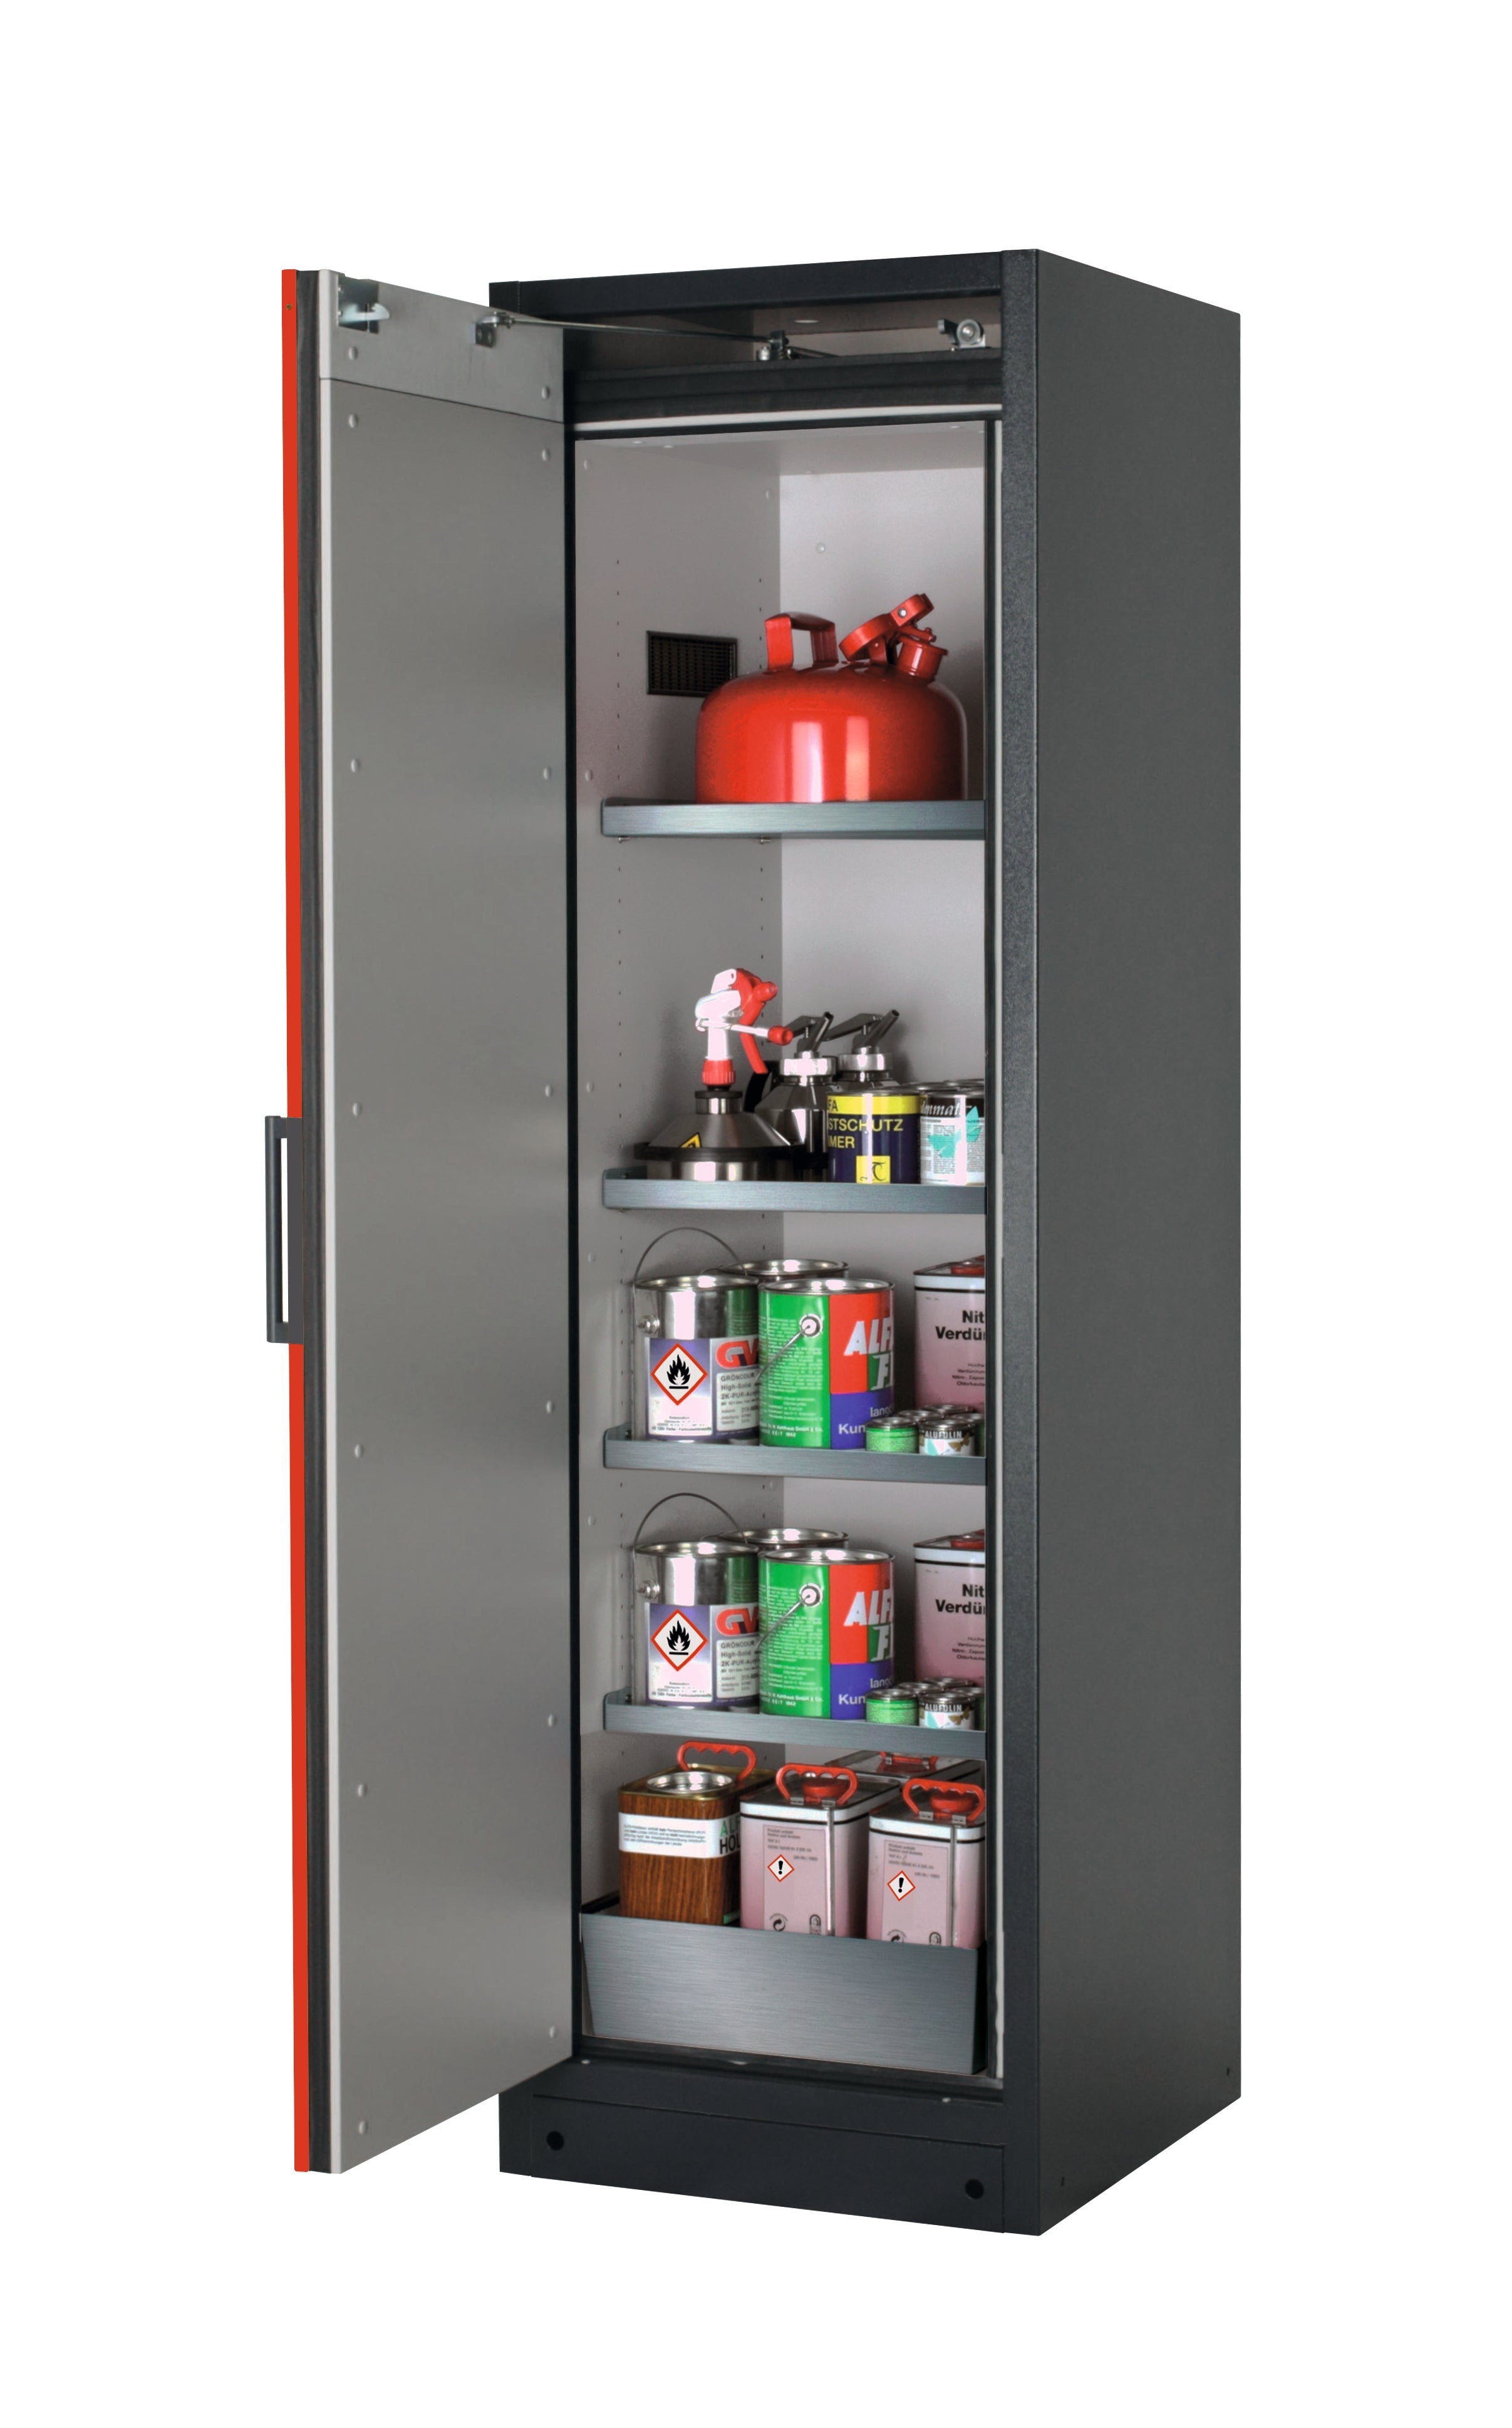 Type 90 safety storage cabinet Q-PEGASUS-90 model Q90.195.060.WDAC in traffic red RAL 3020 with 4x shelf standard (stainless steel 1.4301),